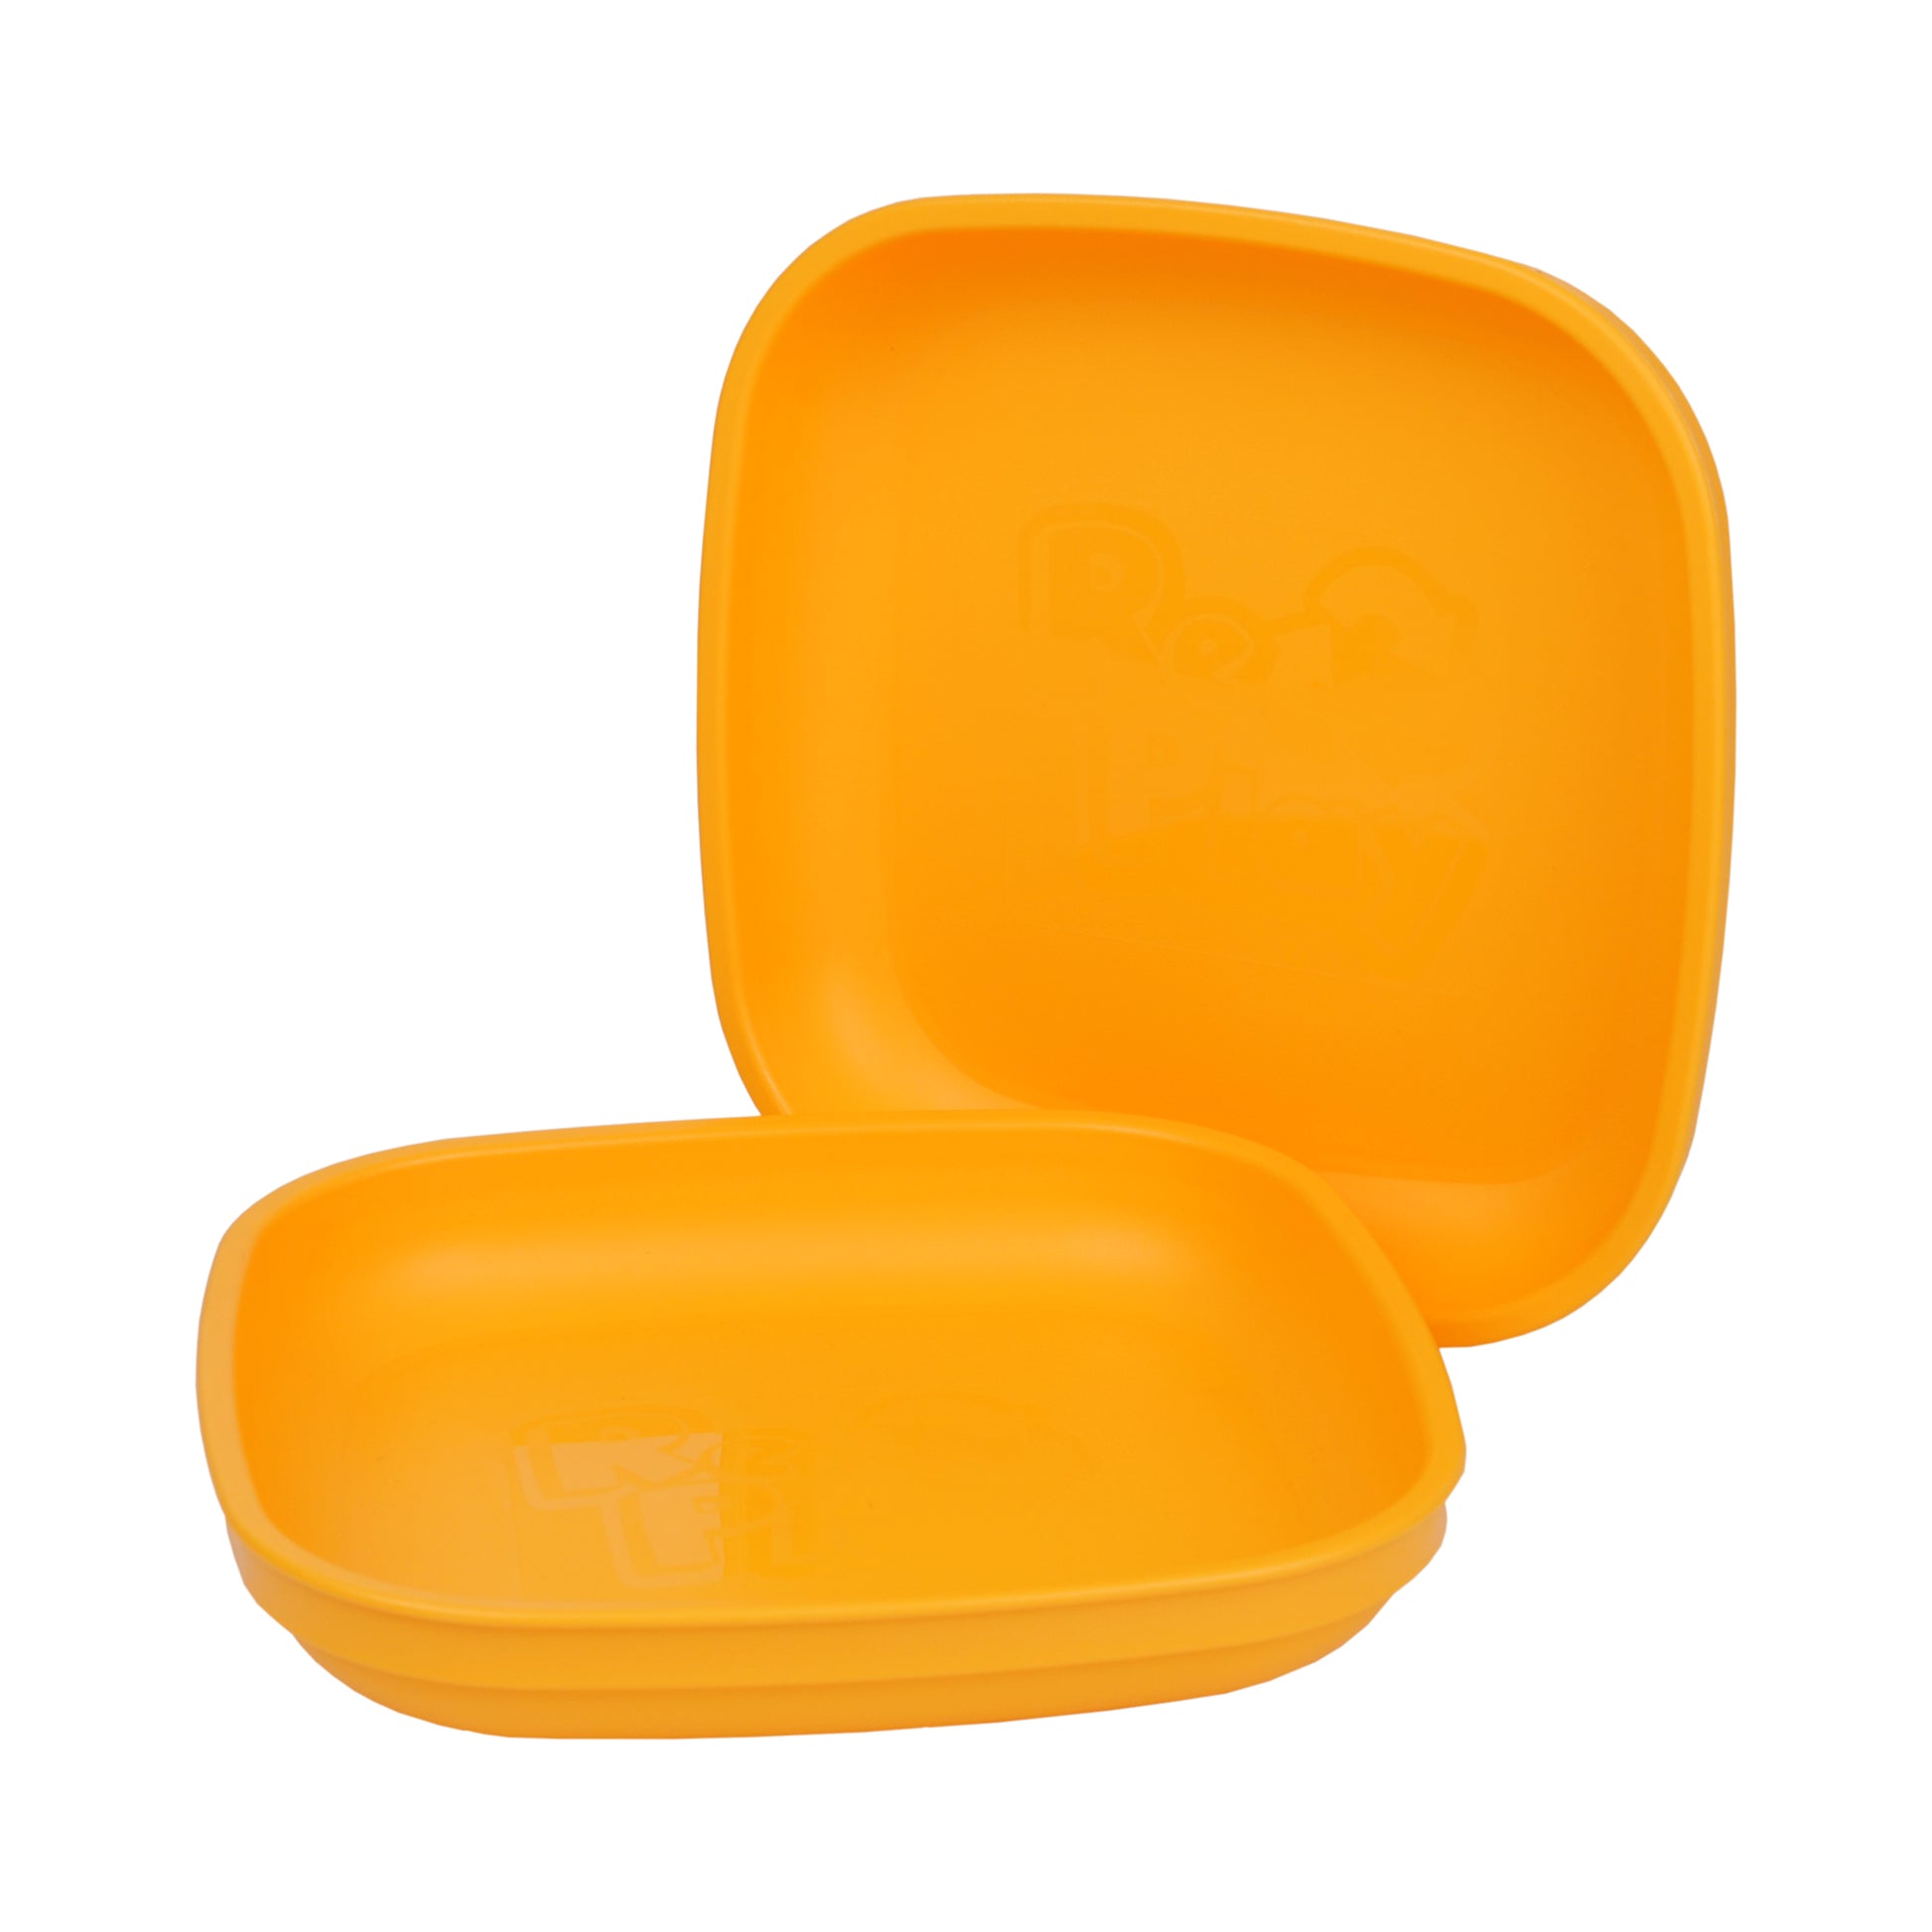 Re-Play Flat Plate Standard Size in Sunny Yellow from Bear & Moo